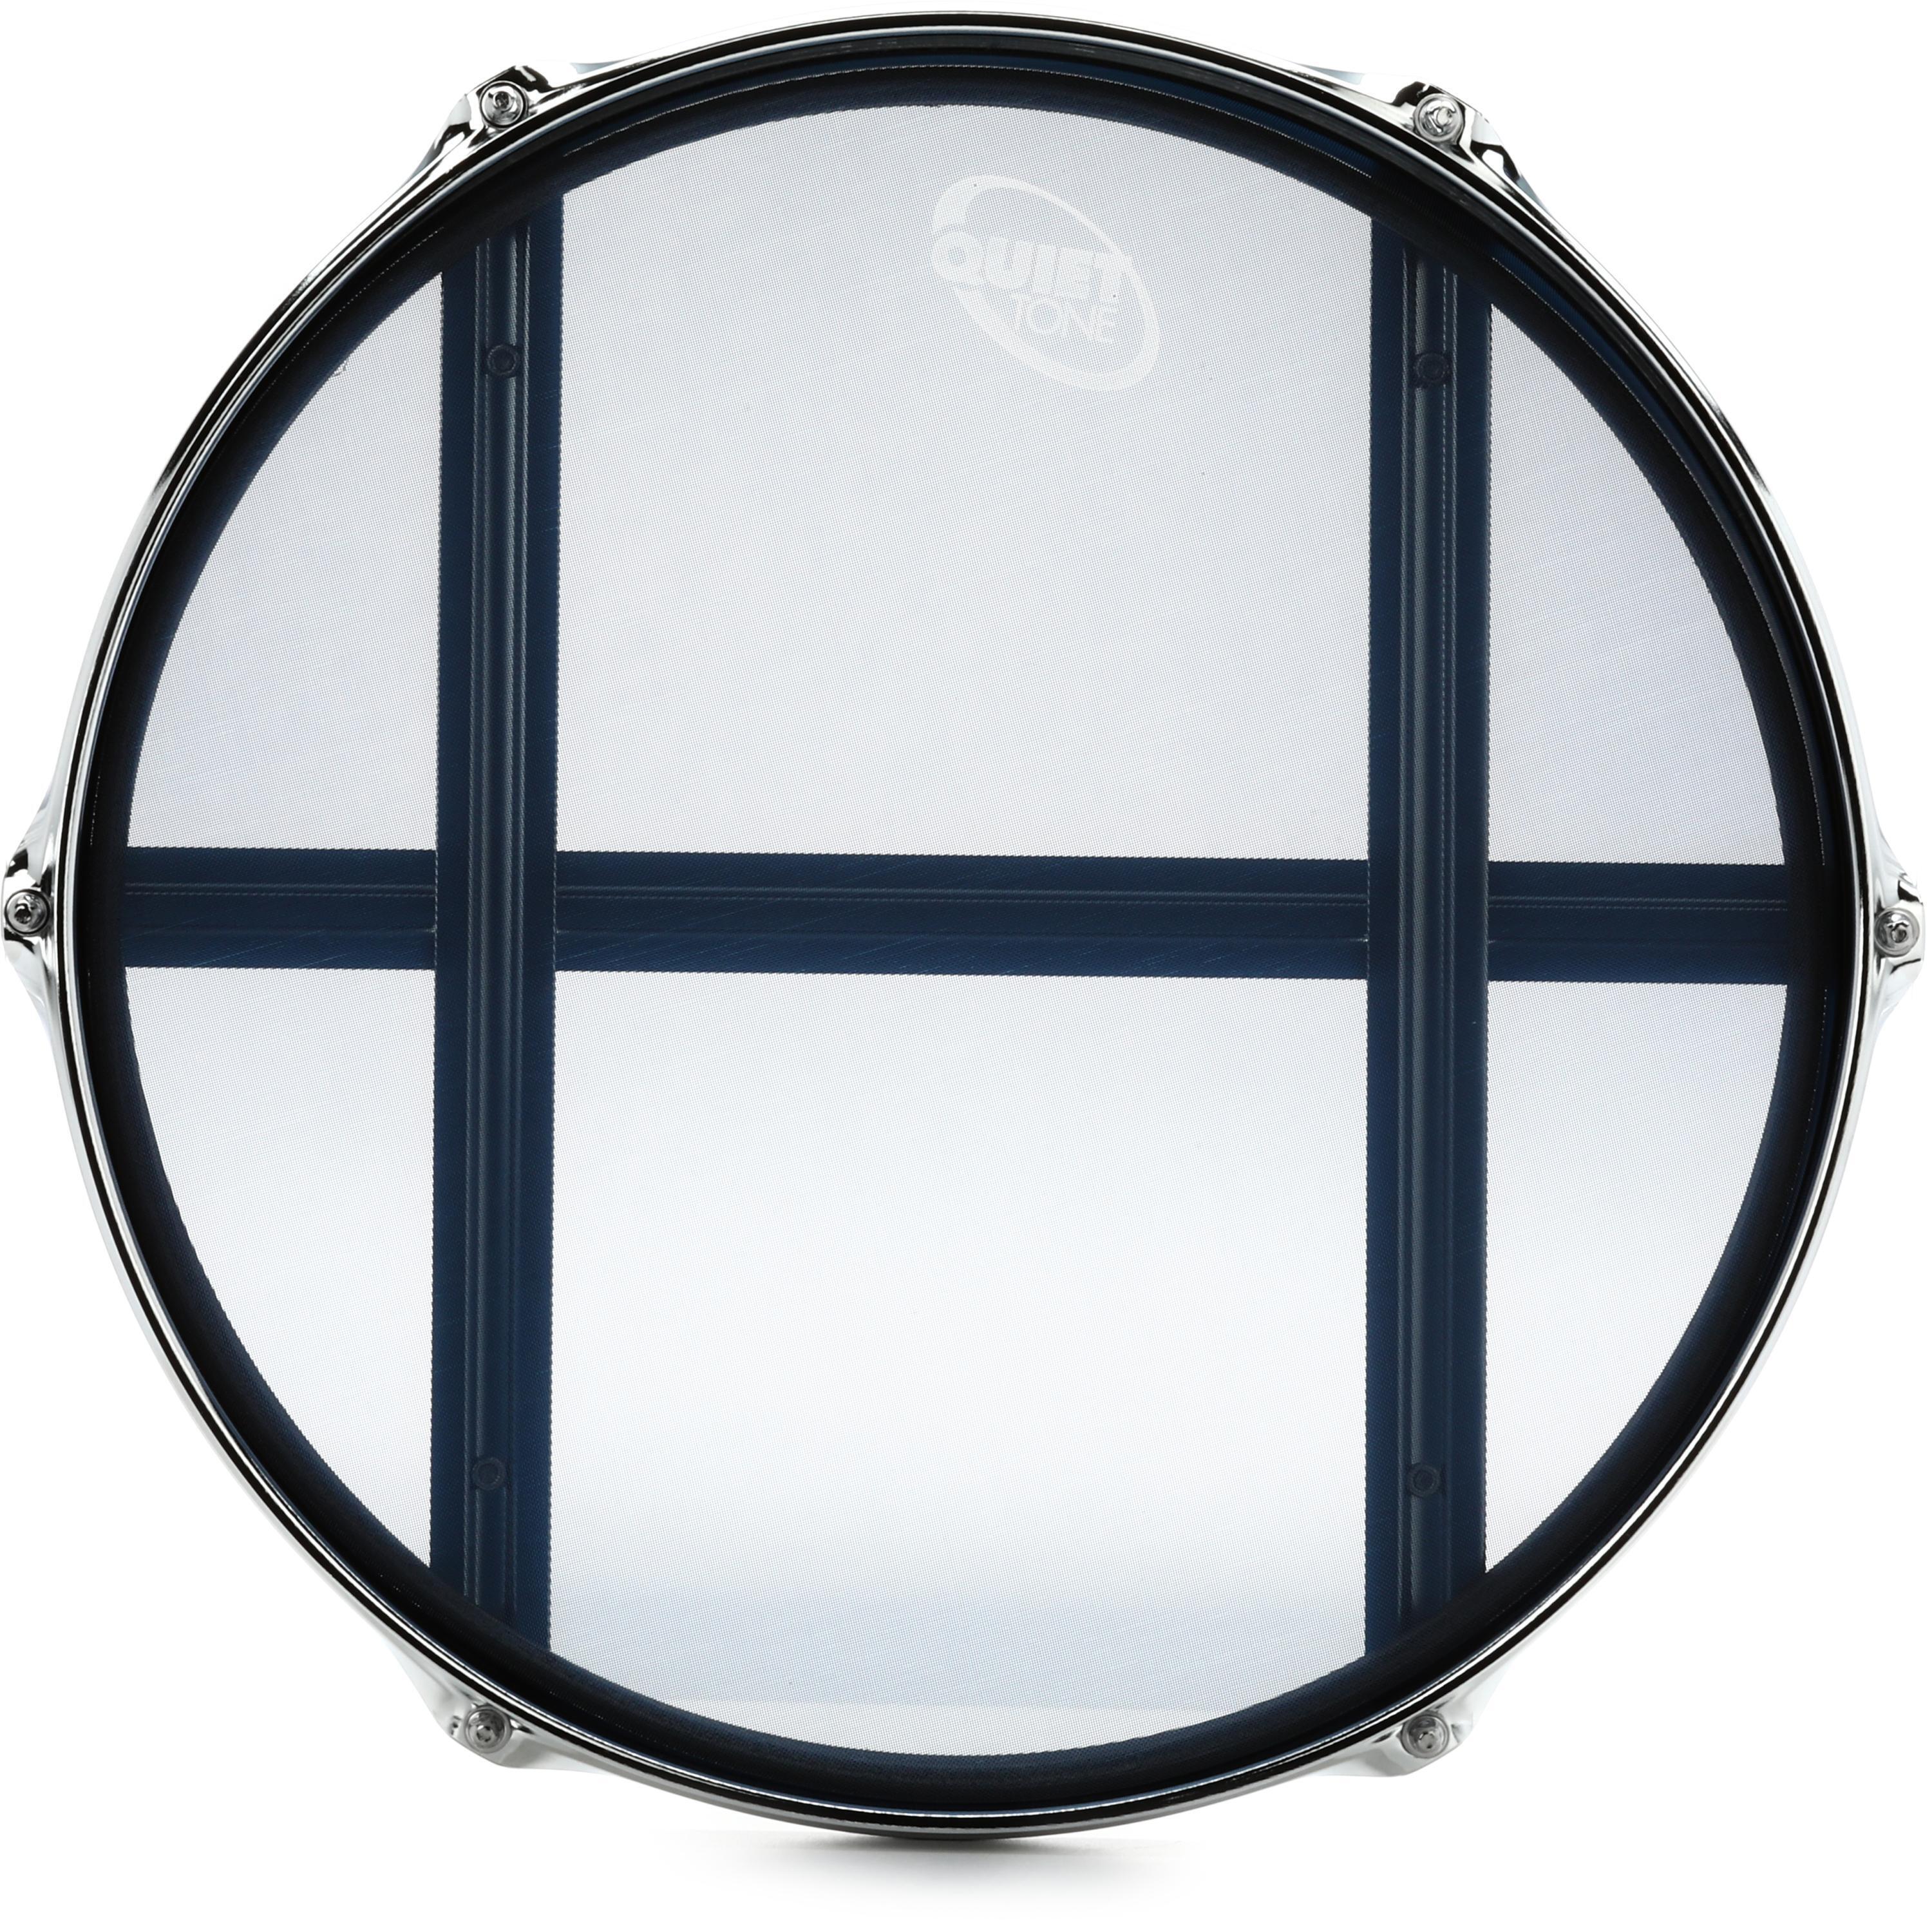 Silent Drum Practice Pad - 12 Inches Double Sided Drum Pad Provides A Great  Rebound - Perfect Snare Drum Pad For Quiet Workouts On Snare Drums And On